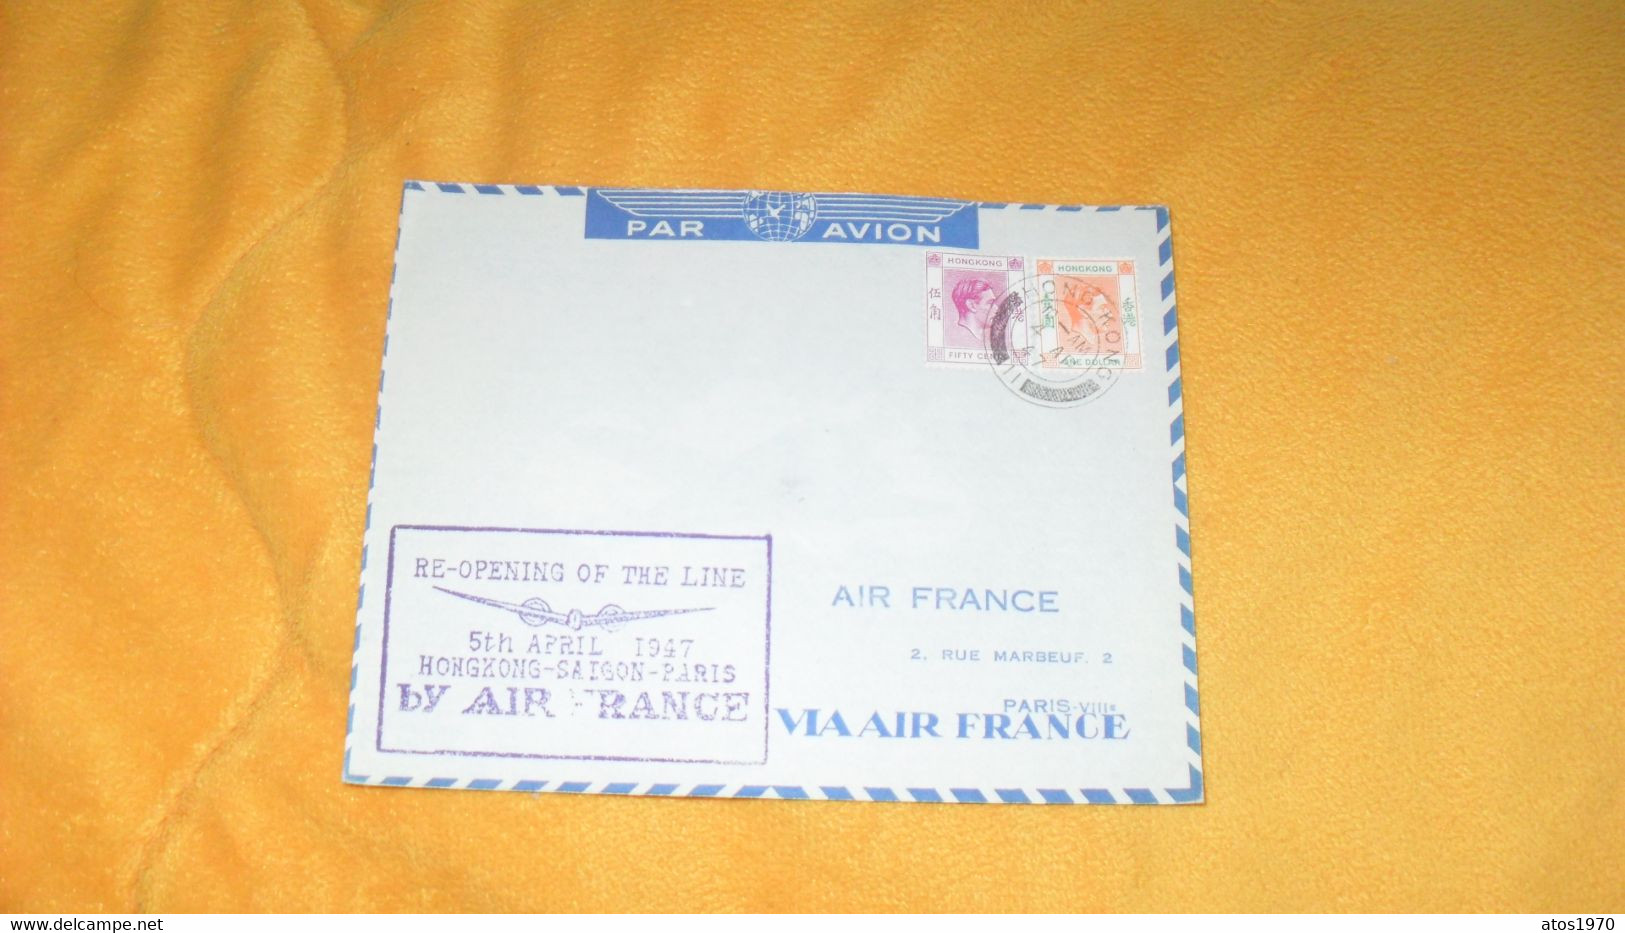 ENVELOPPE ANCIENNE DE 1947../ RE-OPENING OF THE LINE 5TH APRIL 1947 HONGKONG SAIGON PARIS BY AIR FRANCE..CACHETS + TIMBR - Covers & Documents